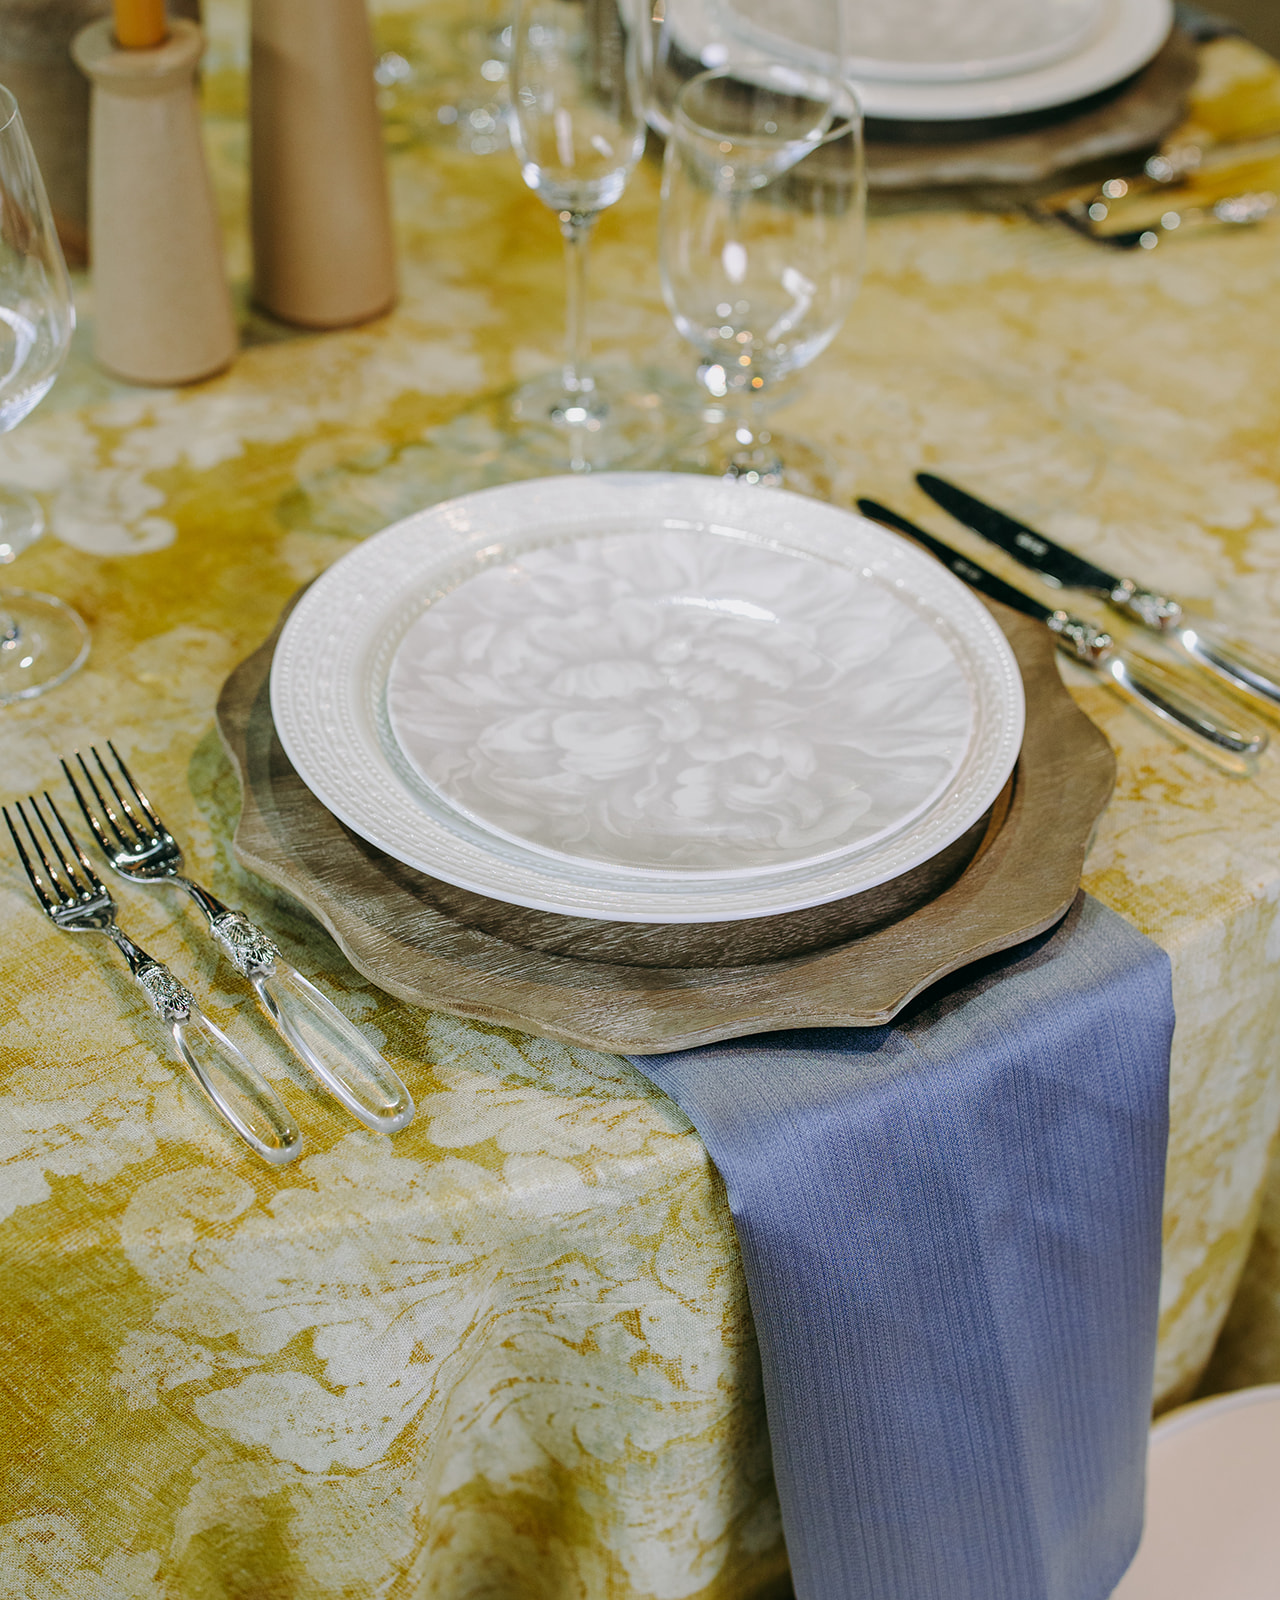 a white plate on a yellow table 